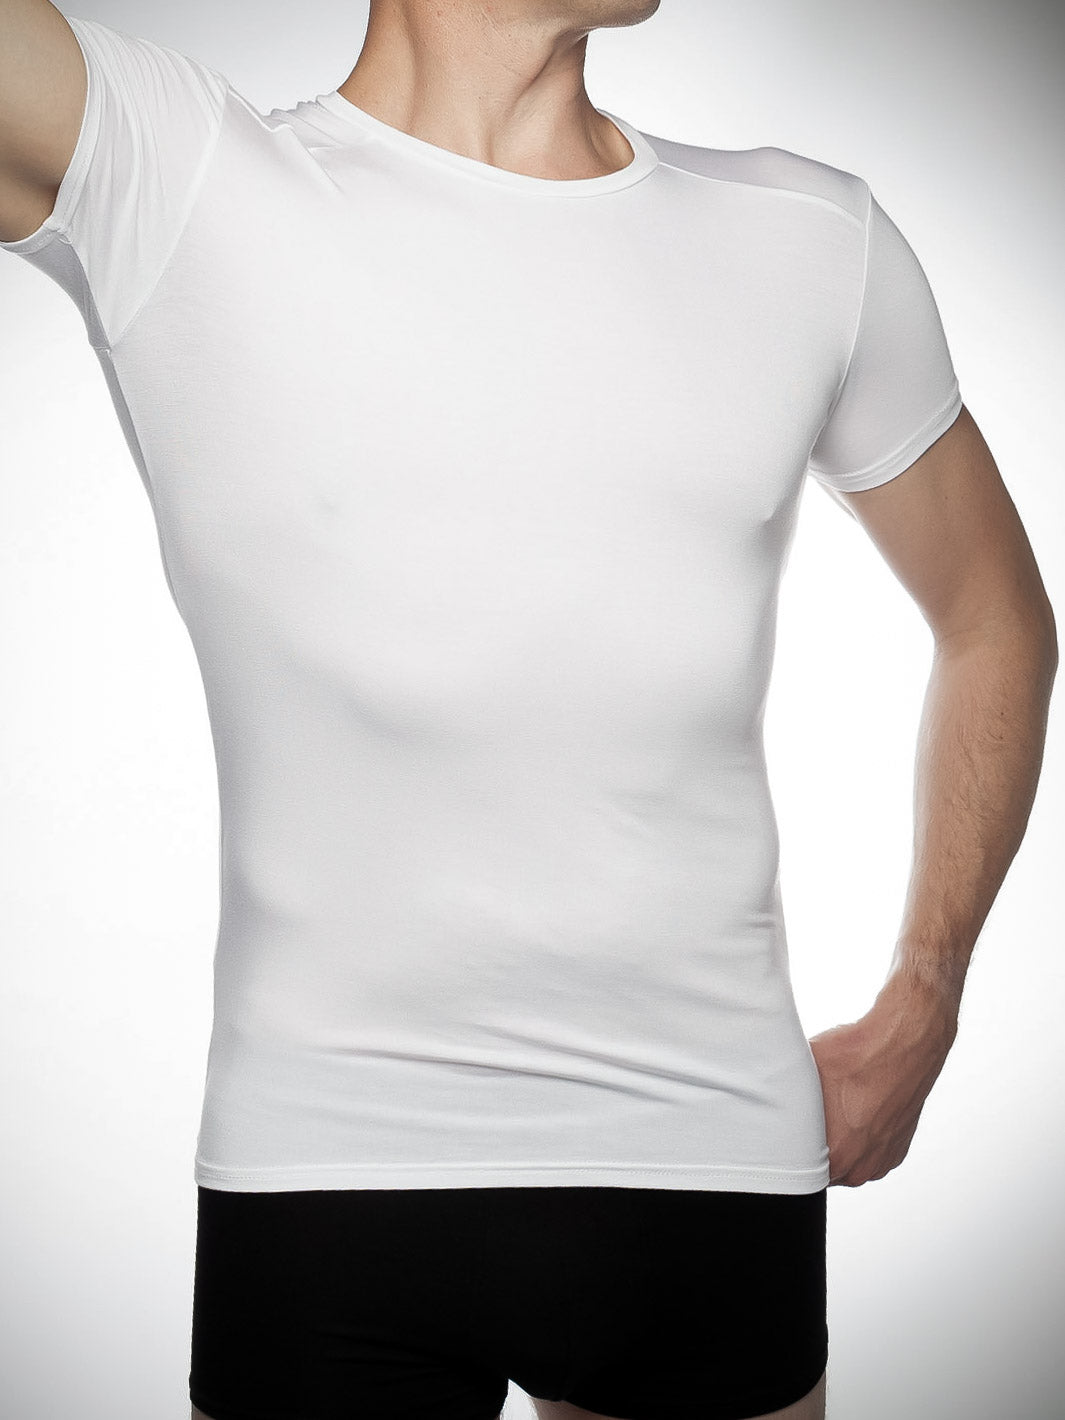 Men's undershirt with crew neck in white bamboo - side view showing underarm